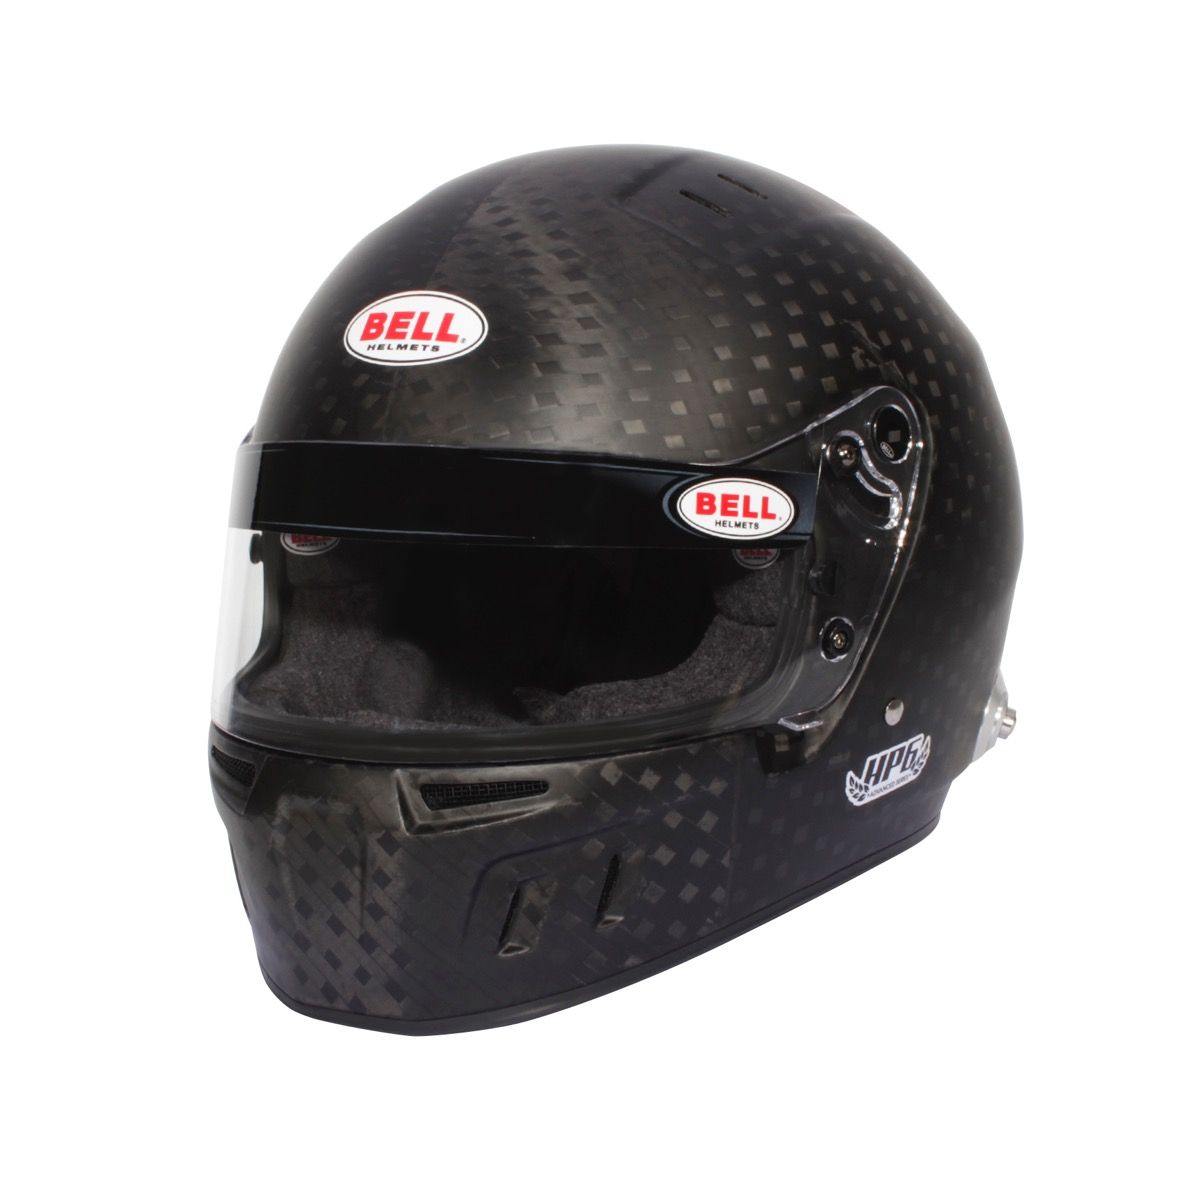 Bell HP6 RD-4C 8860-2018 Carbon Fiber Helmet - Front View Image  Gain a detailed look at the Bell HP6 8860-2018 Carbon Fiber Helmet from the front in this image, showcasing its advanced design.